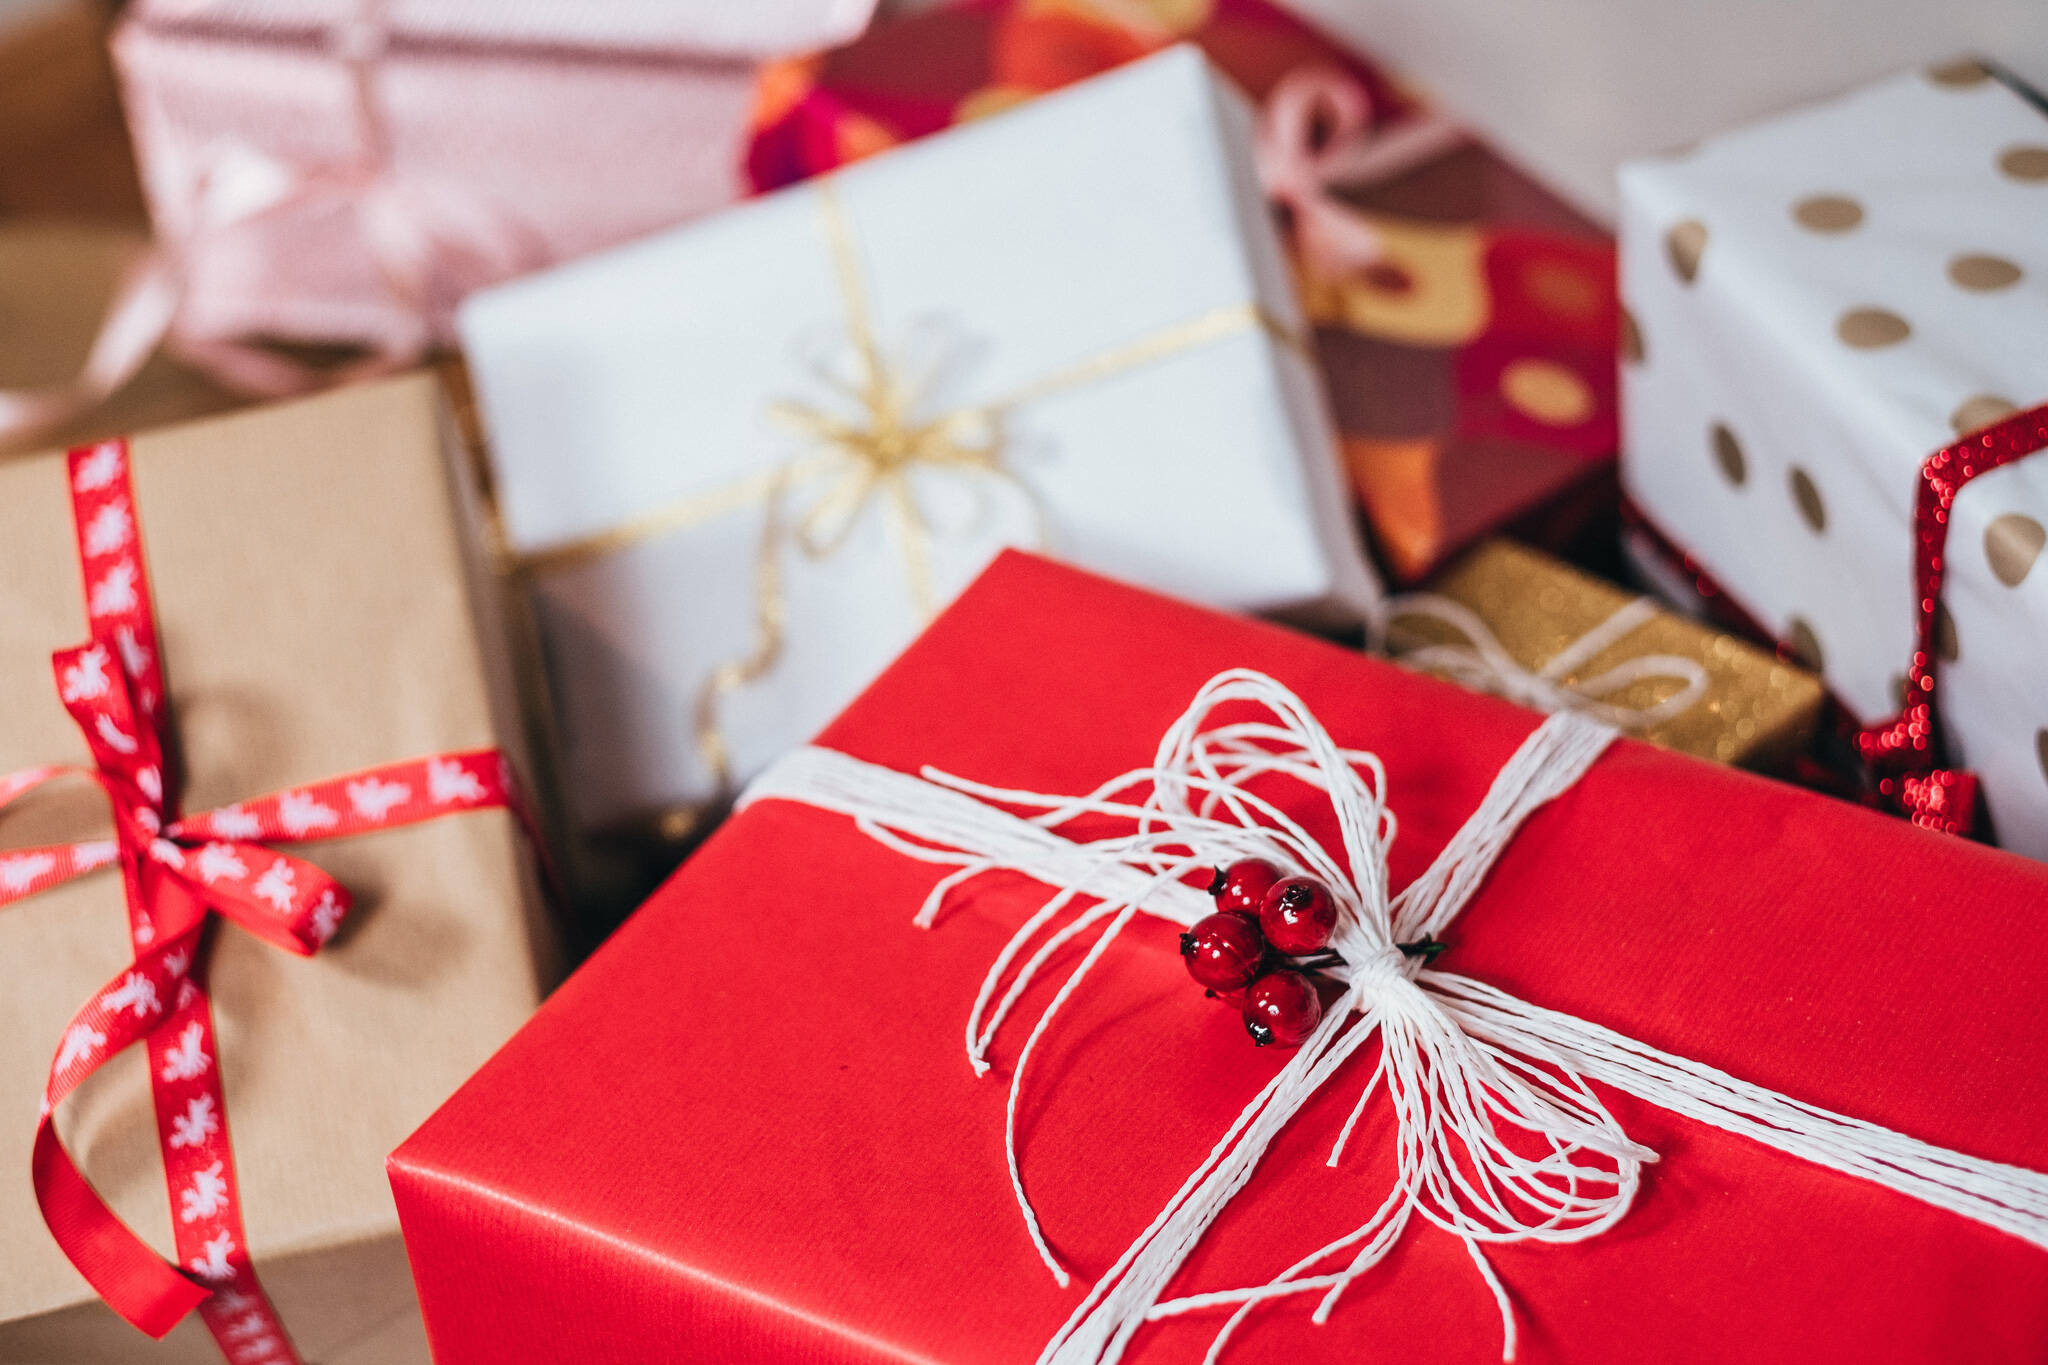 Where to donate your unwanted Christmas gifts in Toronto